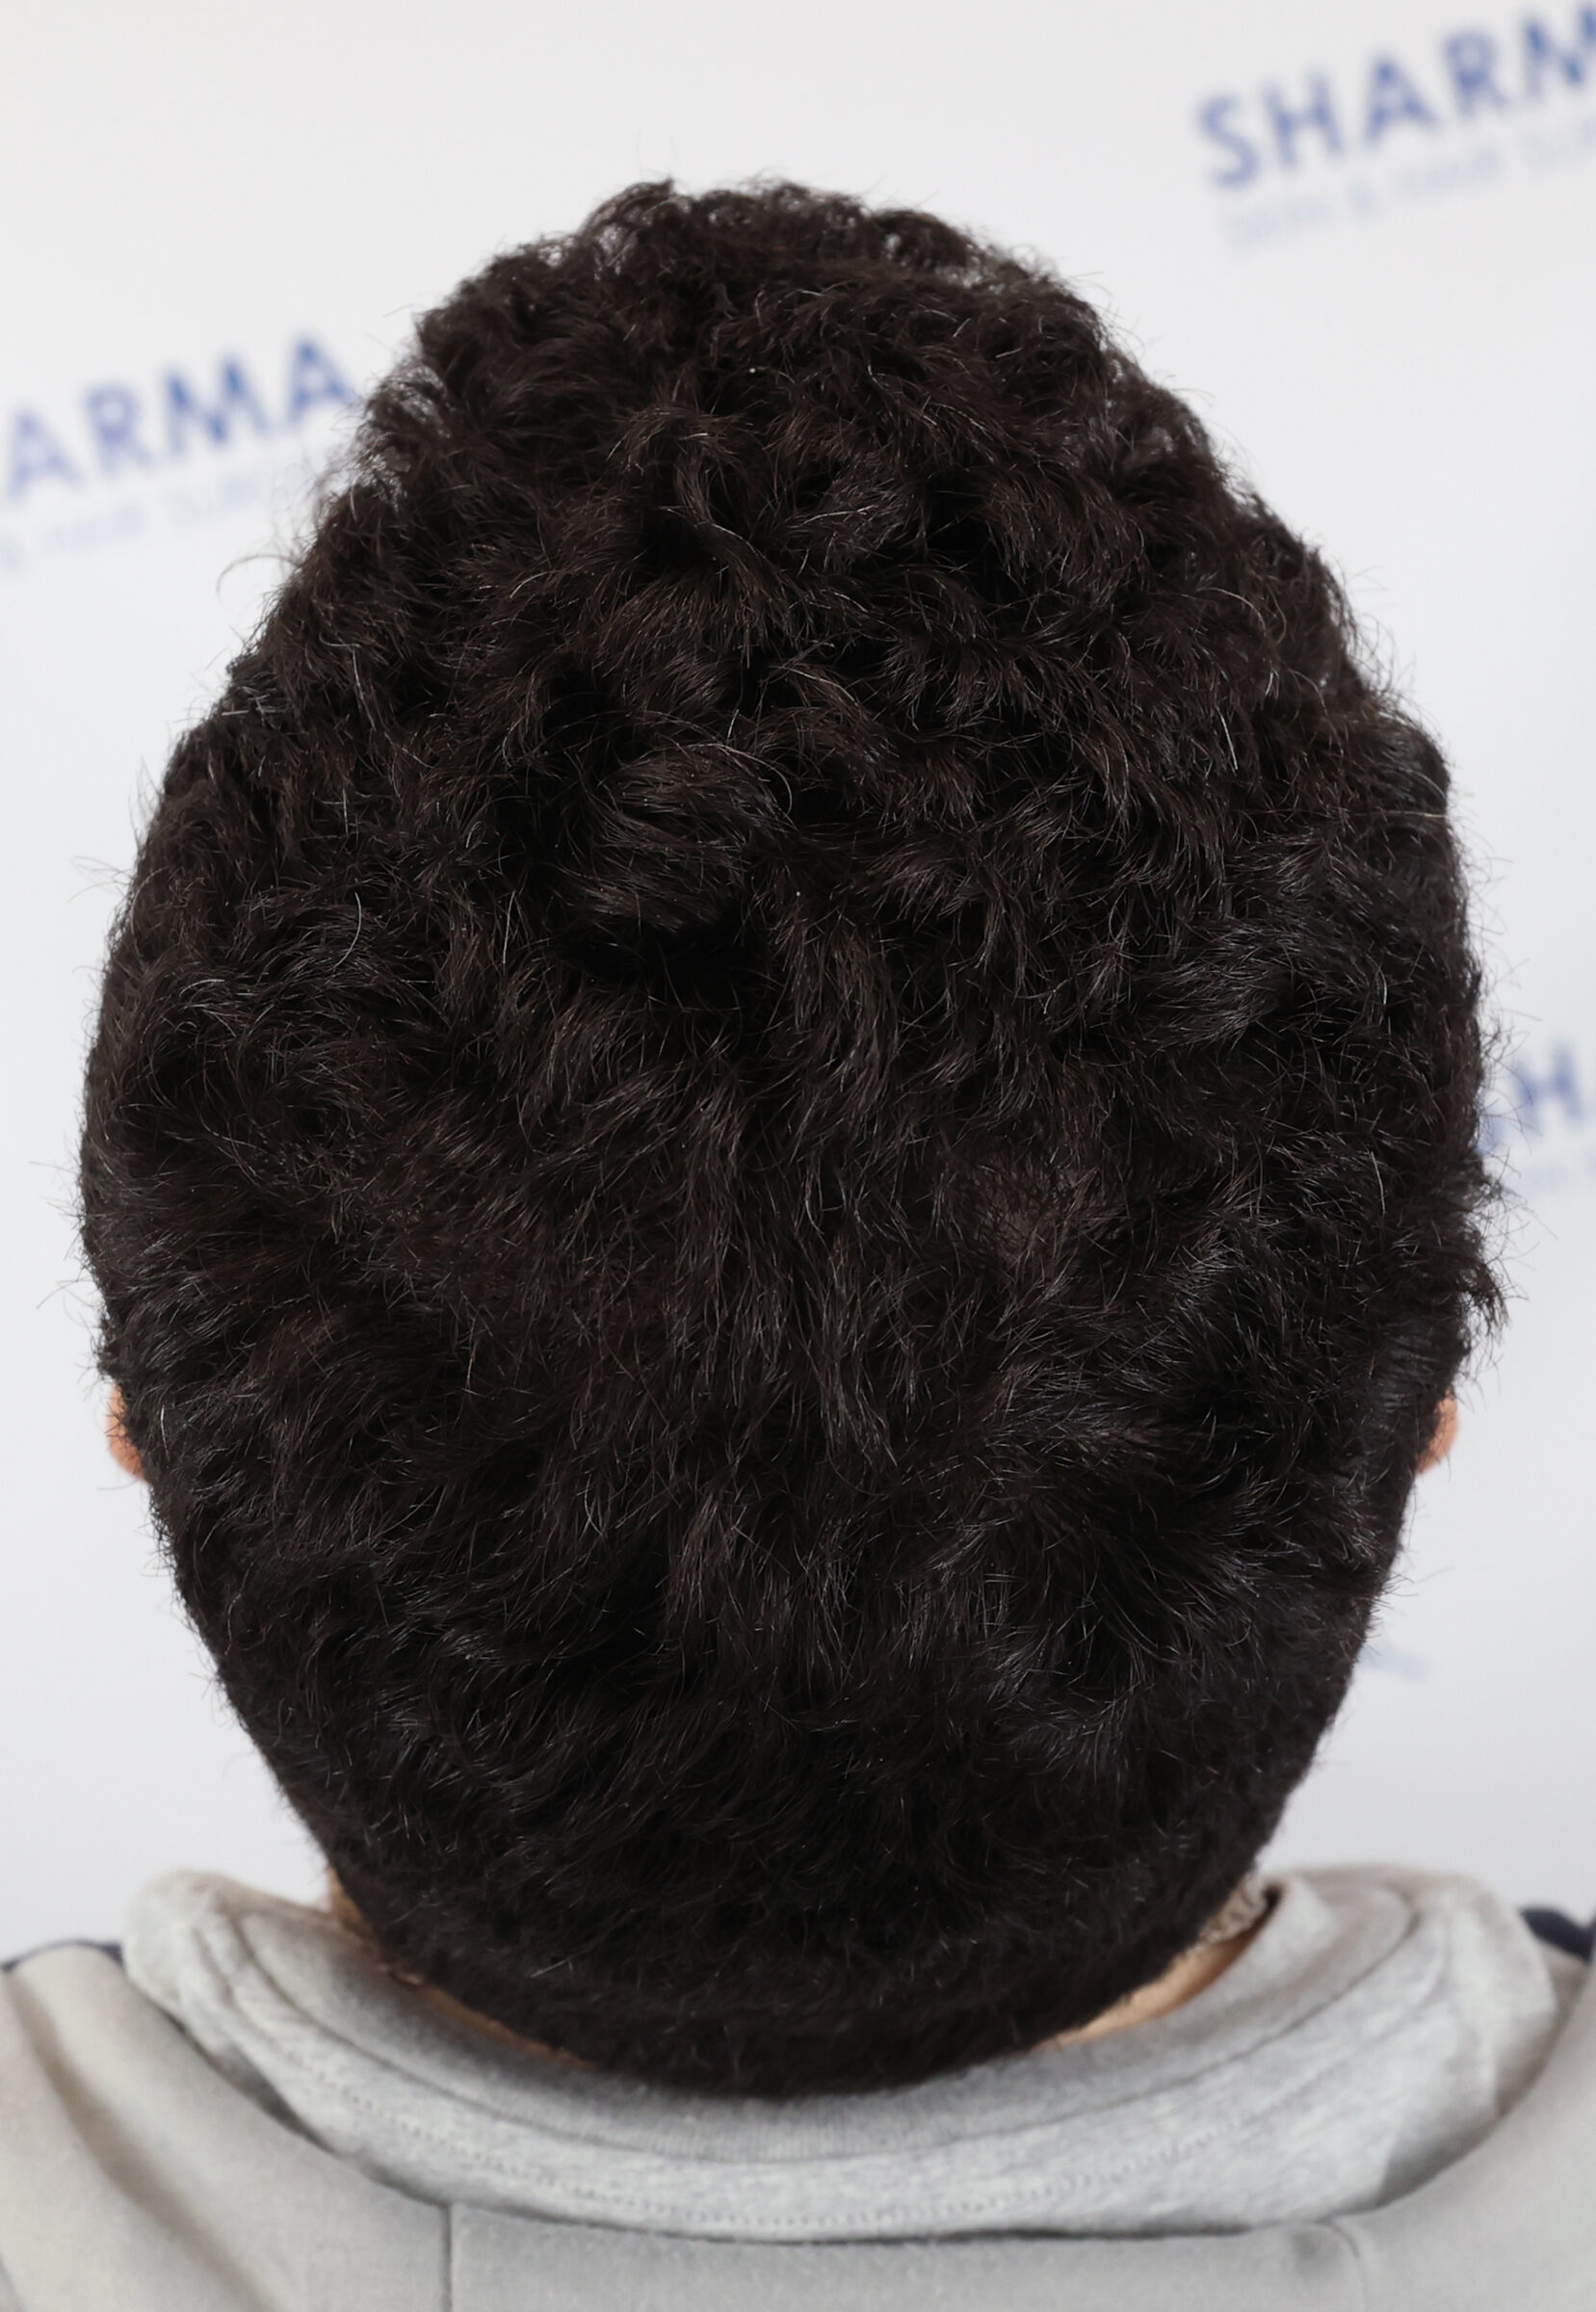 FUE hair transplant with 1500 grafts